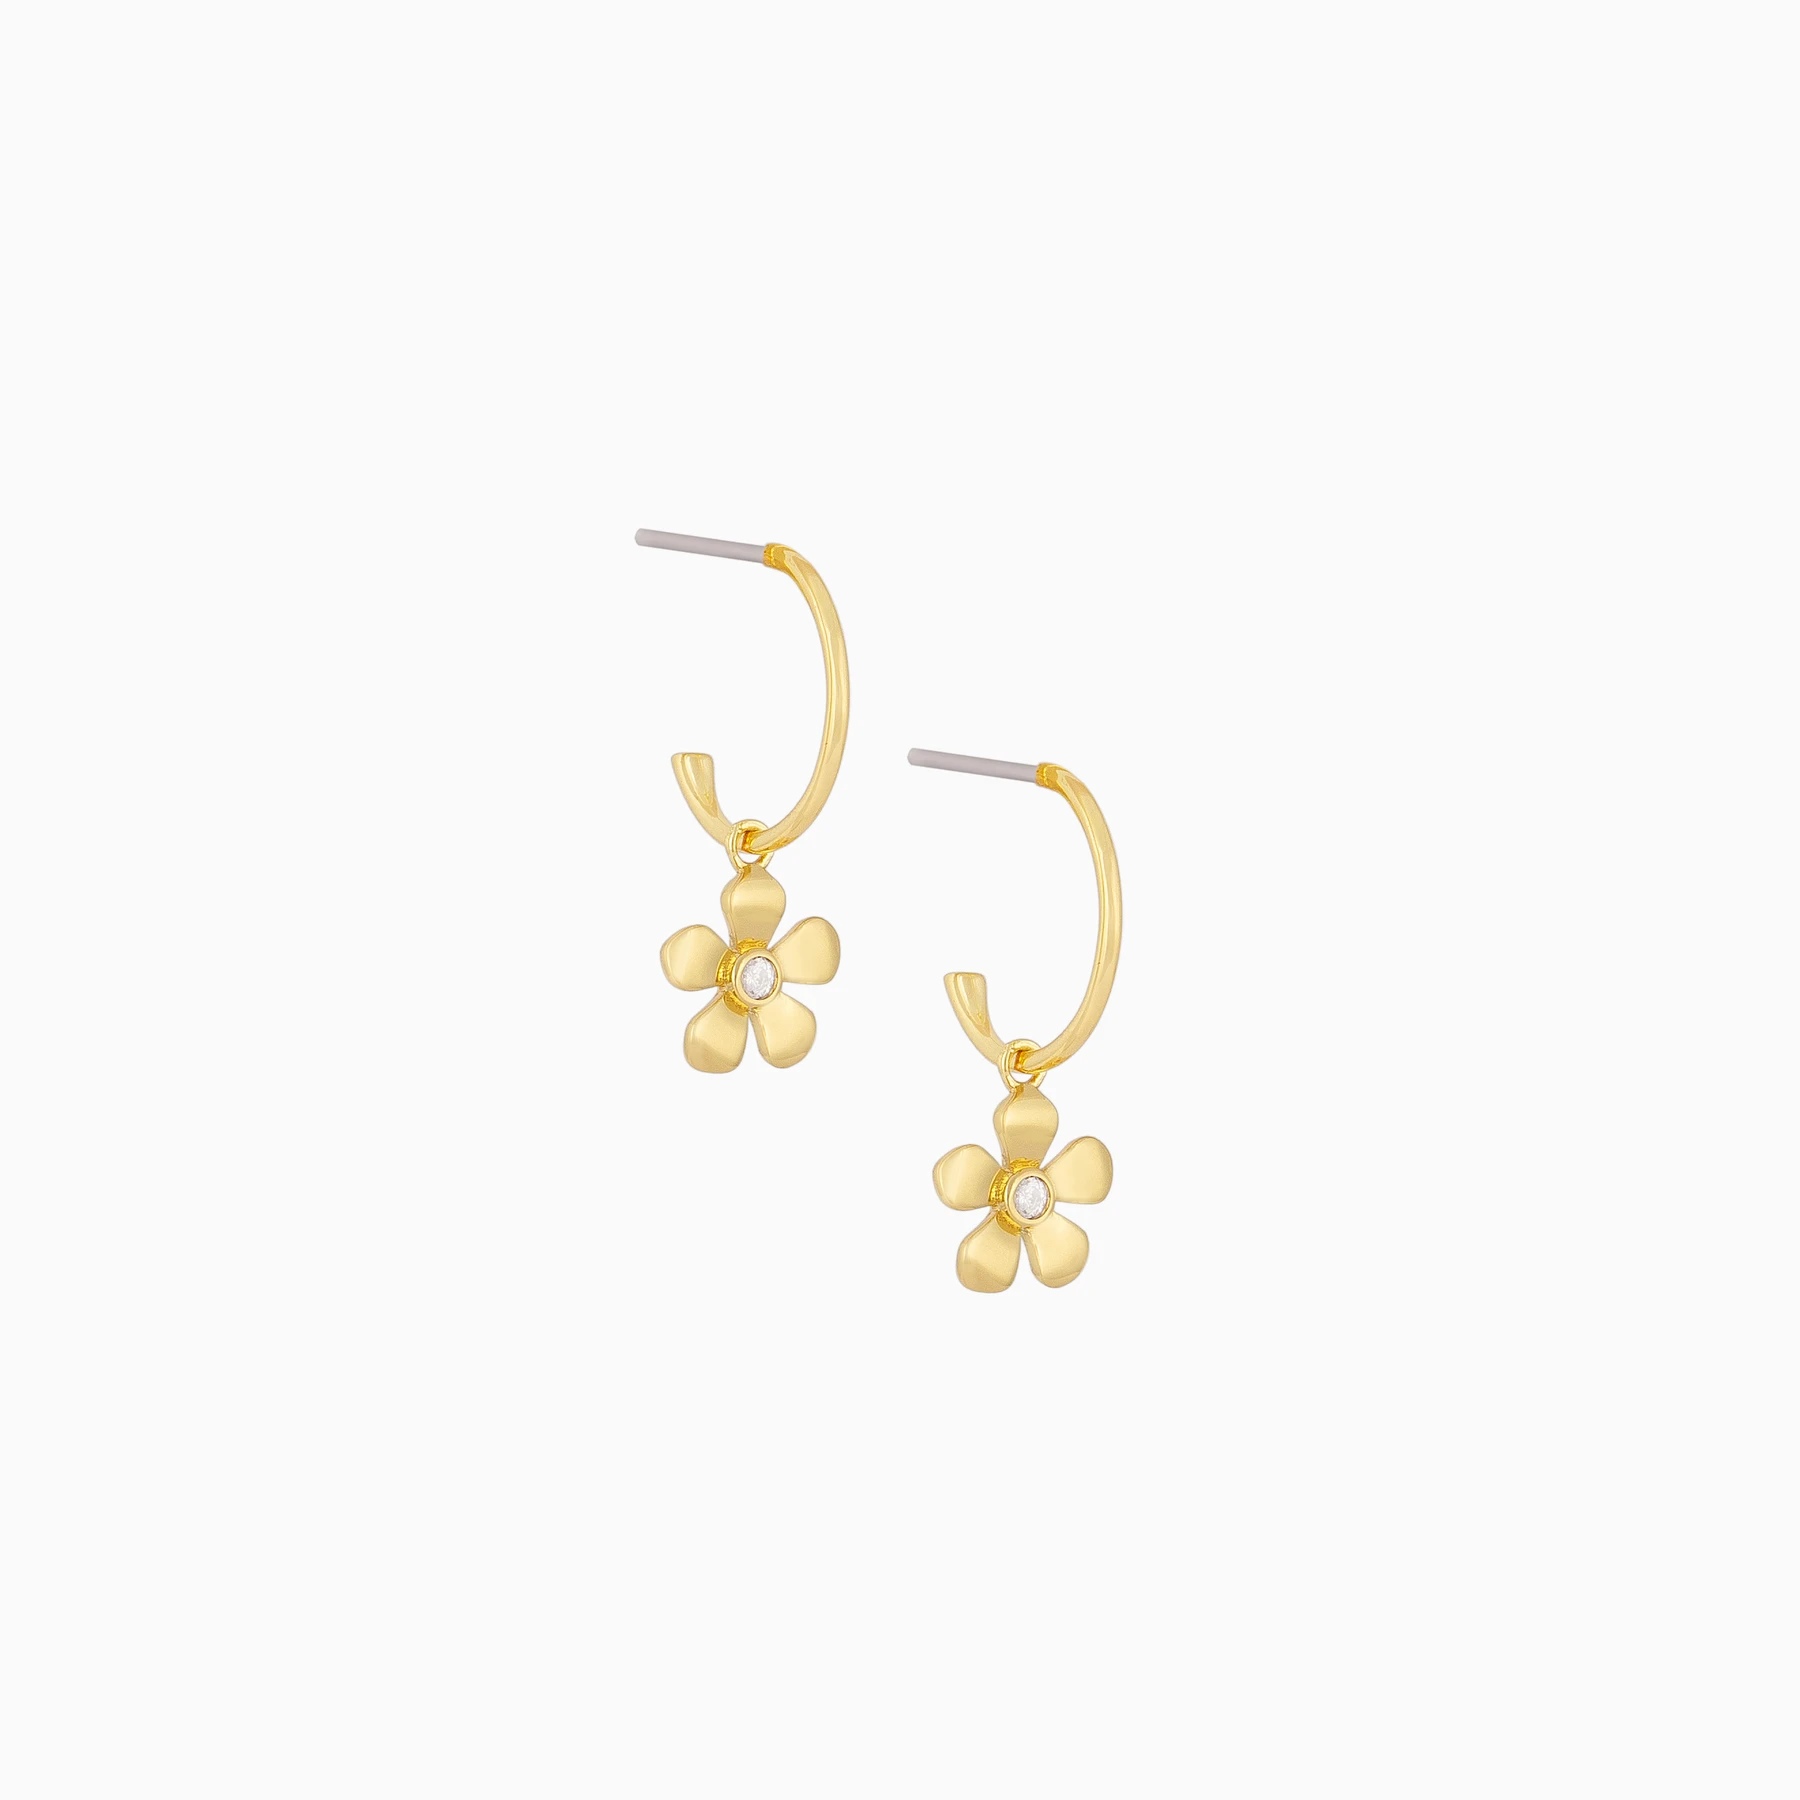 Uncommon James: Fiore Mini Hoops Earrings - Gold